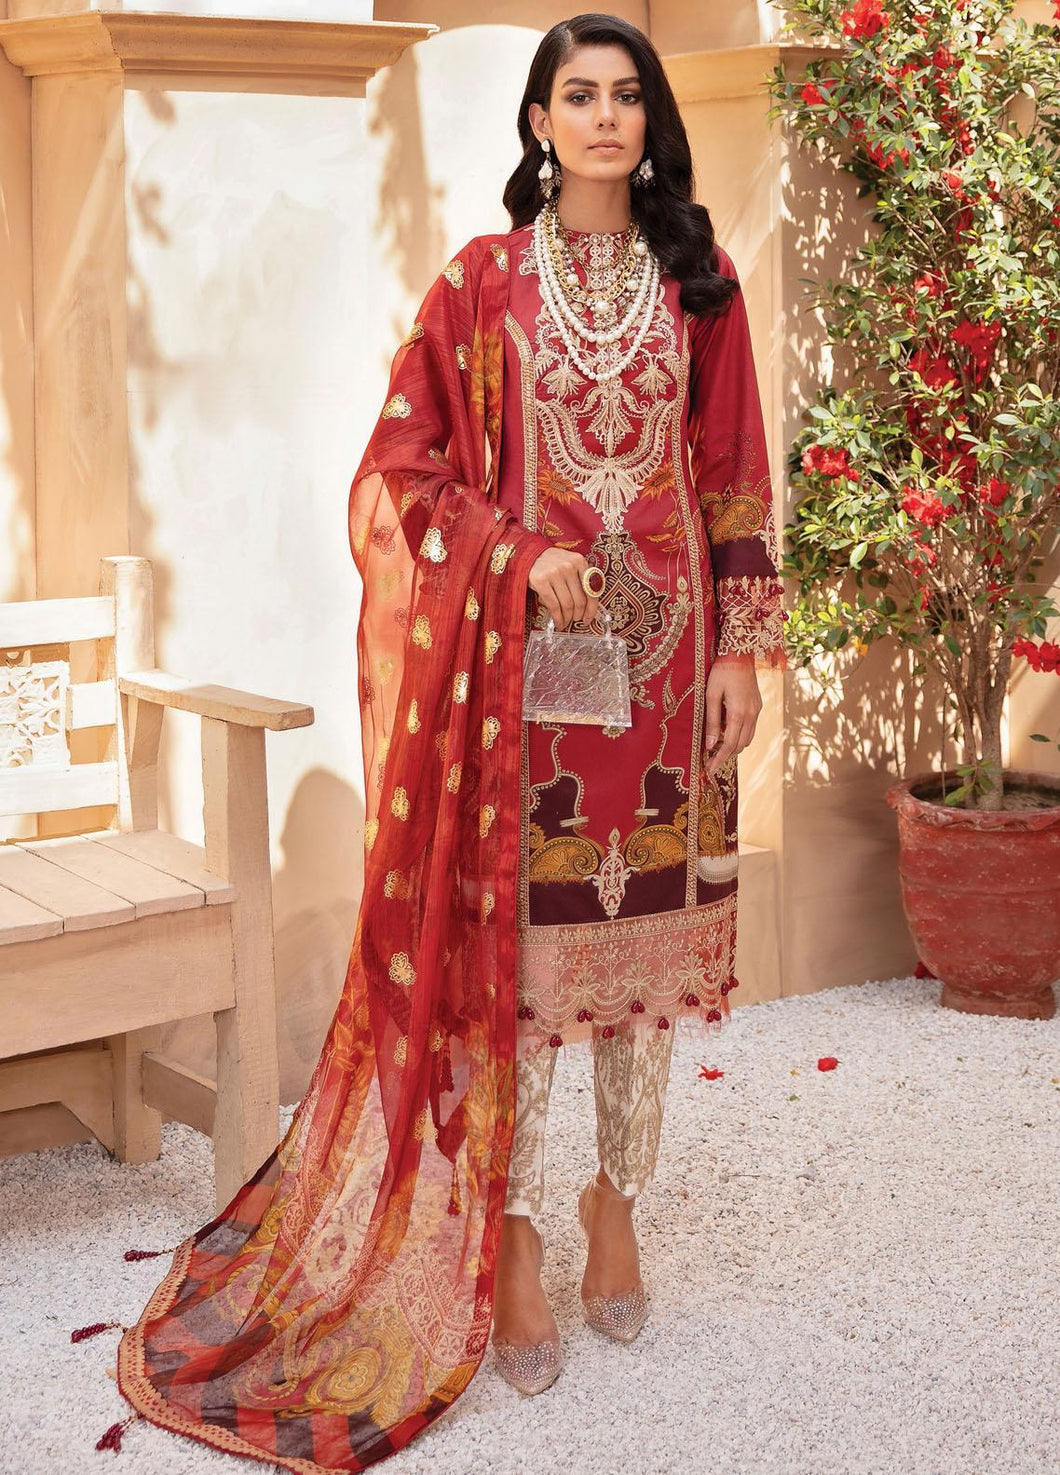 Buy Gulaal Luxury Lawn 2021 | GL21LL 02 | Aarzoo Red Dress from Lebaasonline Pakistani Clothes Stockist in the UK @ best price- SALE Shop Gulaal Lawn 2021, Maria B Lawn 2021 Summer Suit, Pakistani Clothes Online UK for Wedding, Bridal Wear Indian & Pakistani Summer Dresses by Gulaal in the UK & USA at LebaasOnline